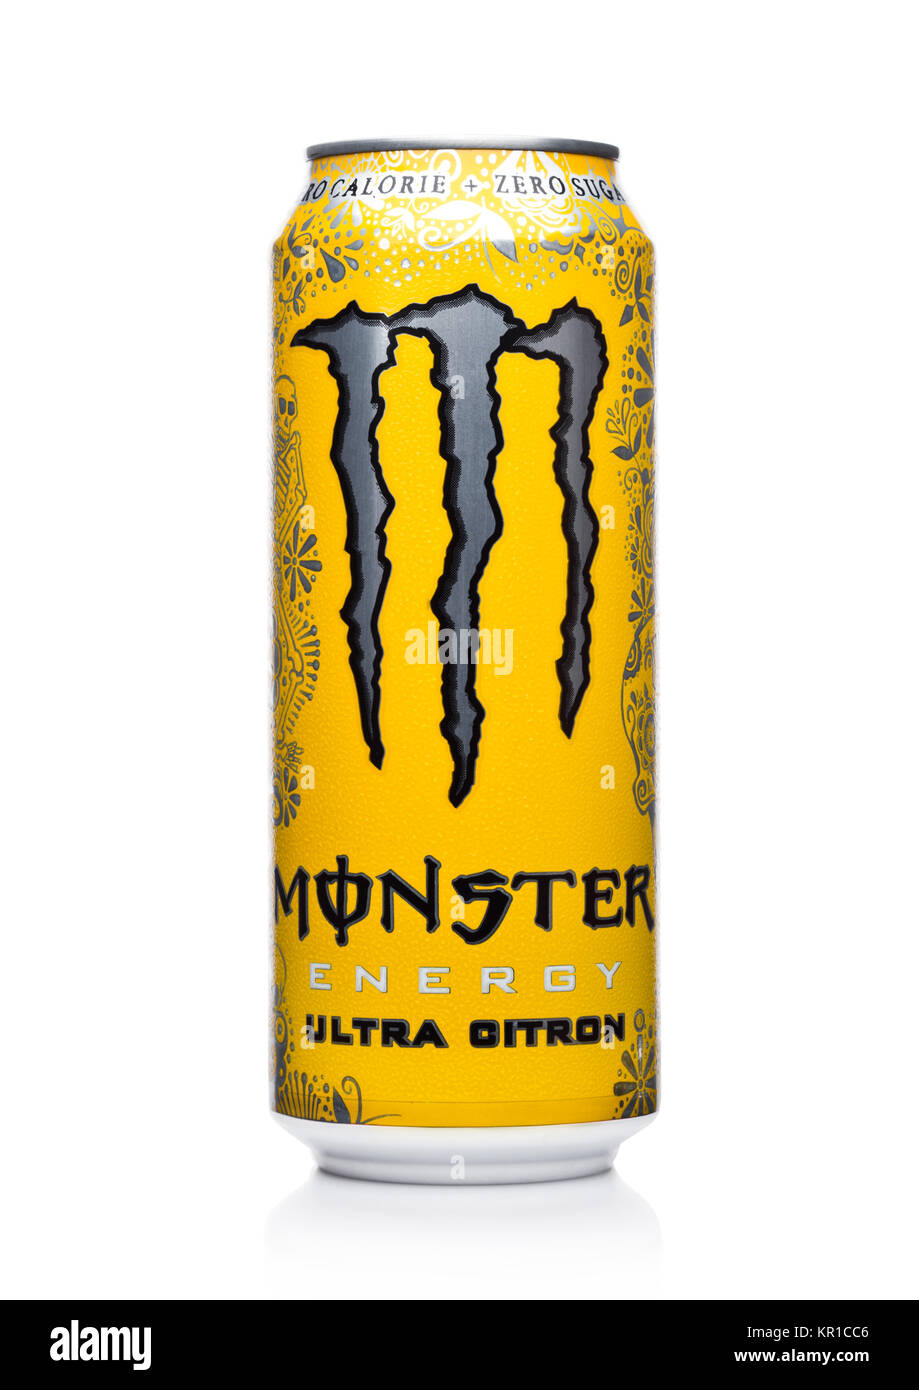 LONDON, UK - DECEMBER 15, 2017: A can of Monster Energy Drink ultra citron  on white background. Introduced in 2002 Monster now has over 30 different d  Stock Photo - Alamy